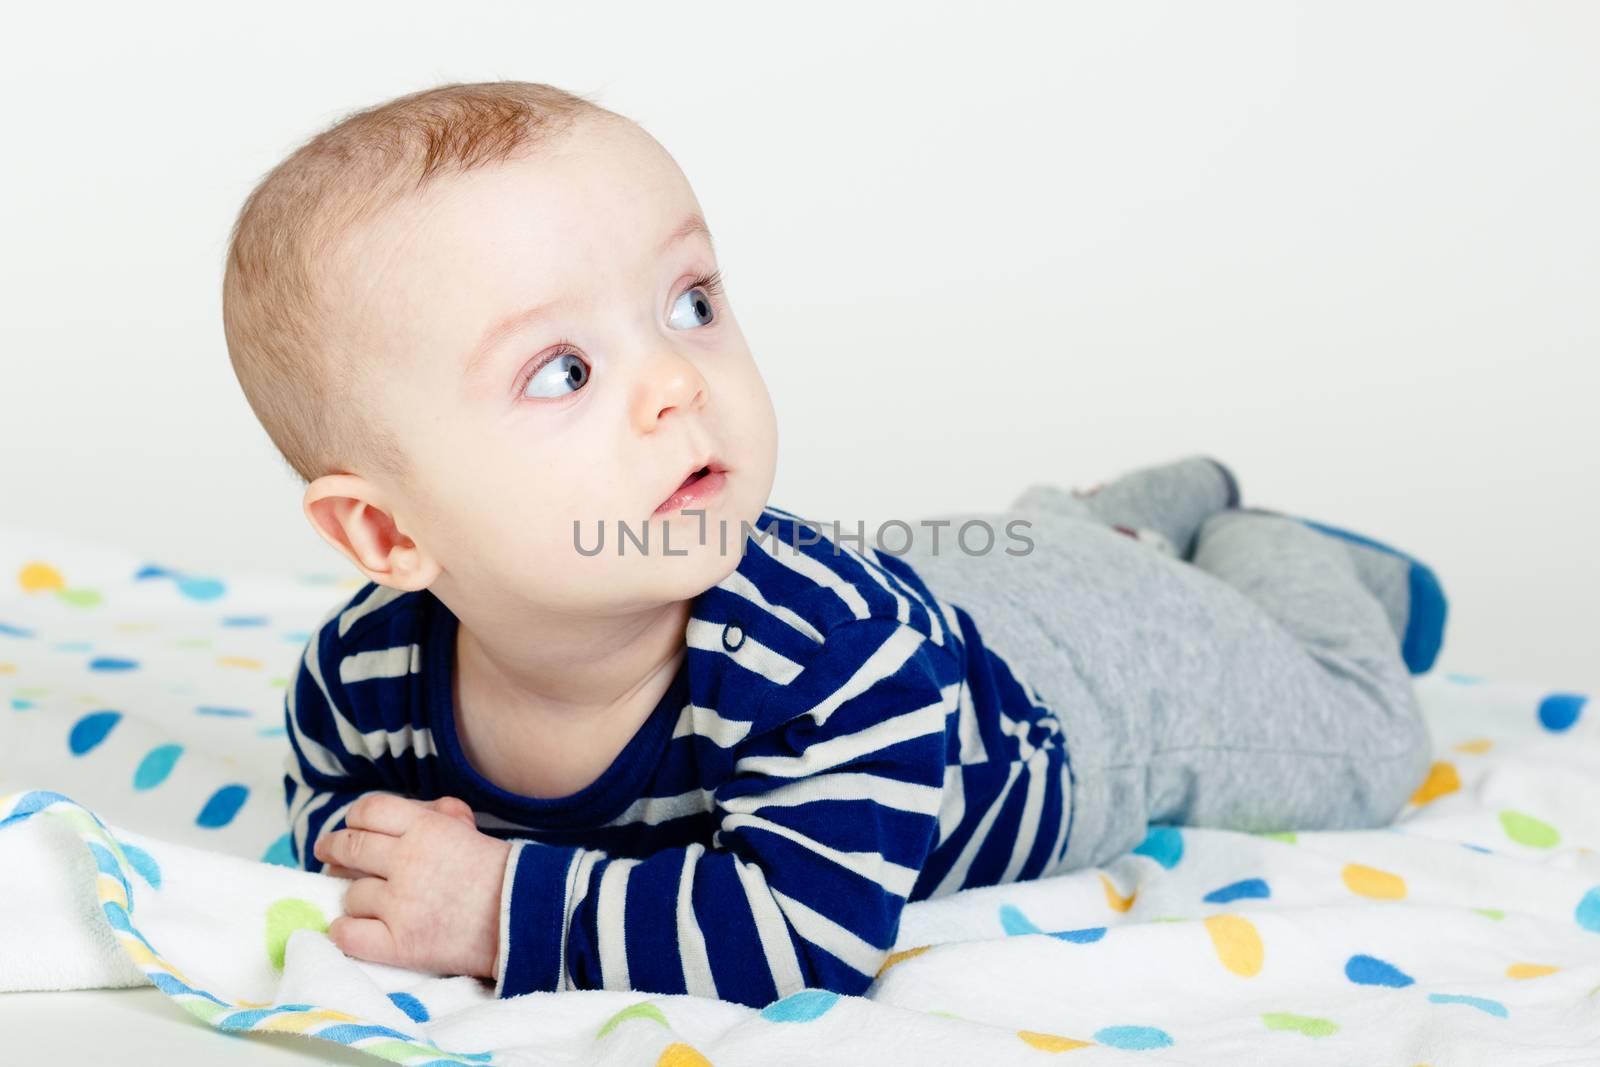 Funny cute blue-eyed baby. Little boy astonished